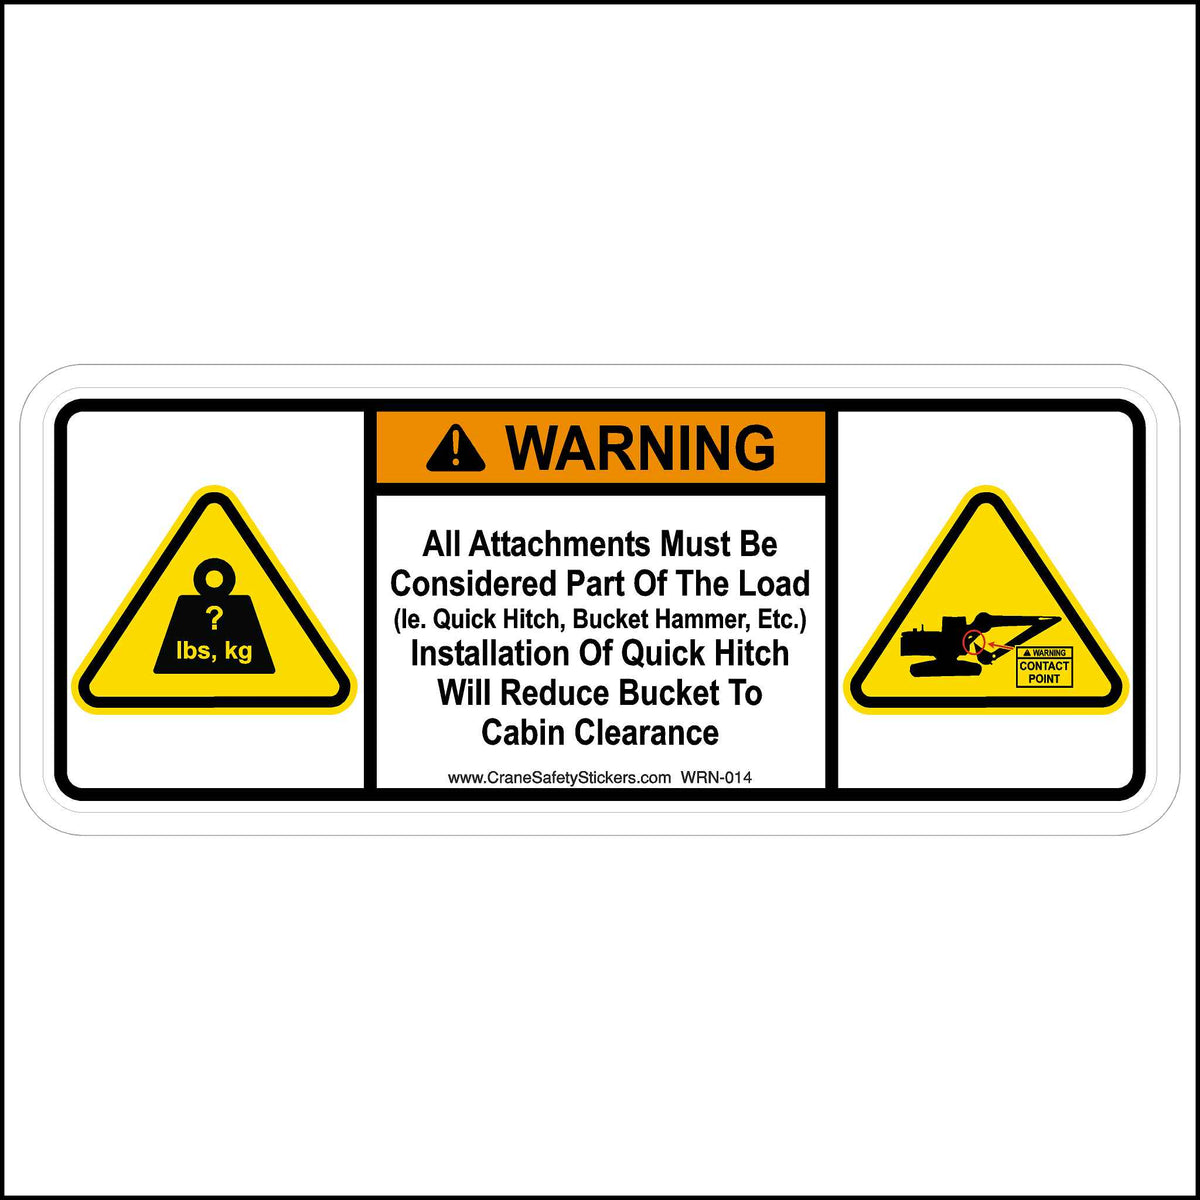 This Warning All Attachments Must Be Considered Part of the Load Sticker Is Printed With. Warning All Attachments Must Be Considered Part of the Load. (ie. Quick Hitch, Bucket Hammer, etc.) Installation of Quick Hitch Will Reduce Bucket To Cab Clearance.